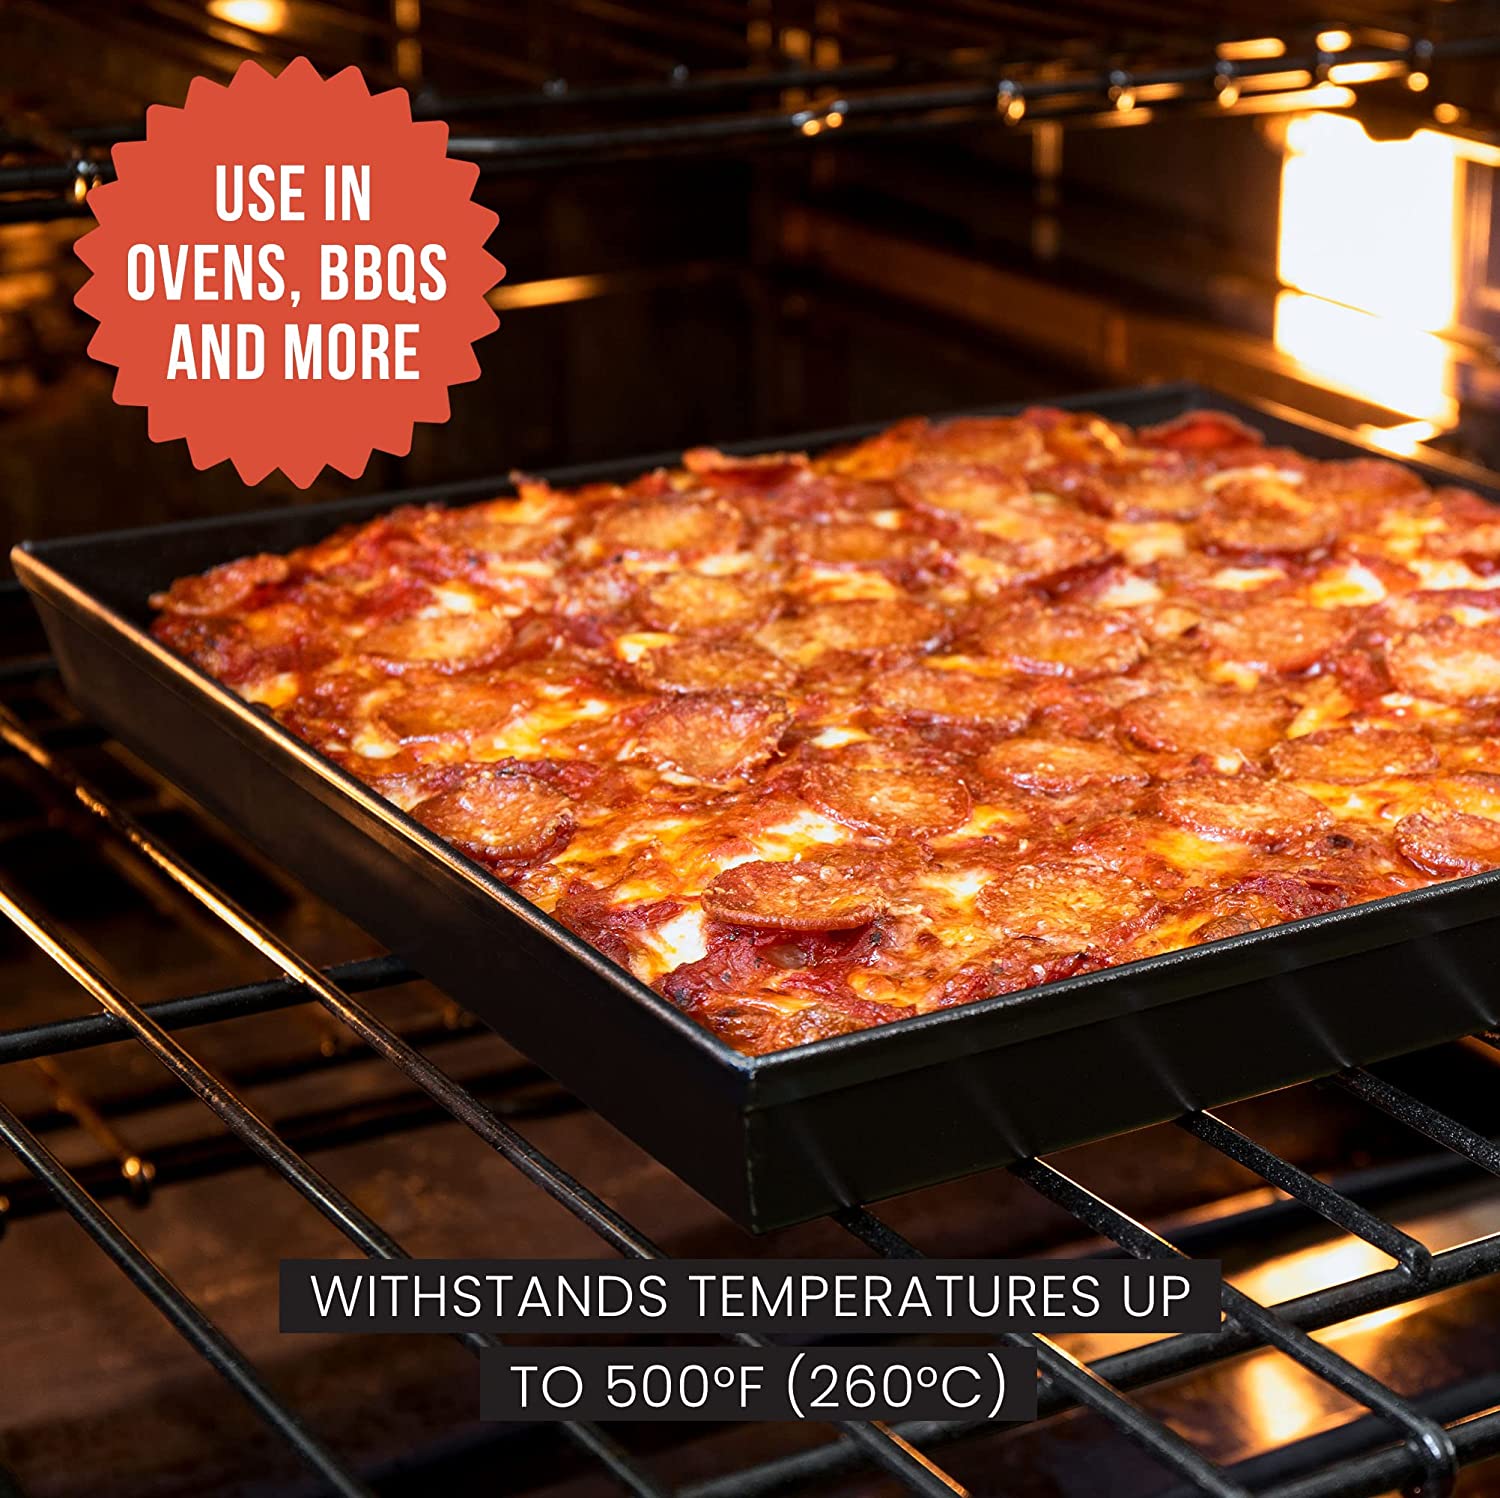 Black Steel Sicilian Pizza Pan Review, FN Dish - Behind-the-Scenes, Food  Trends, and Best Recipes : Food Network